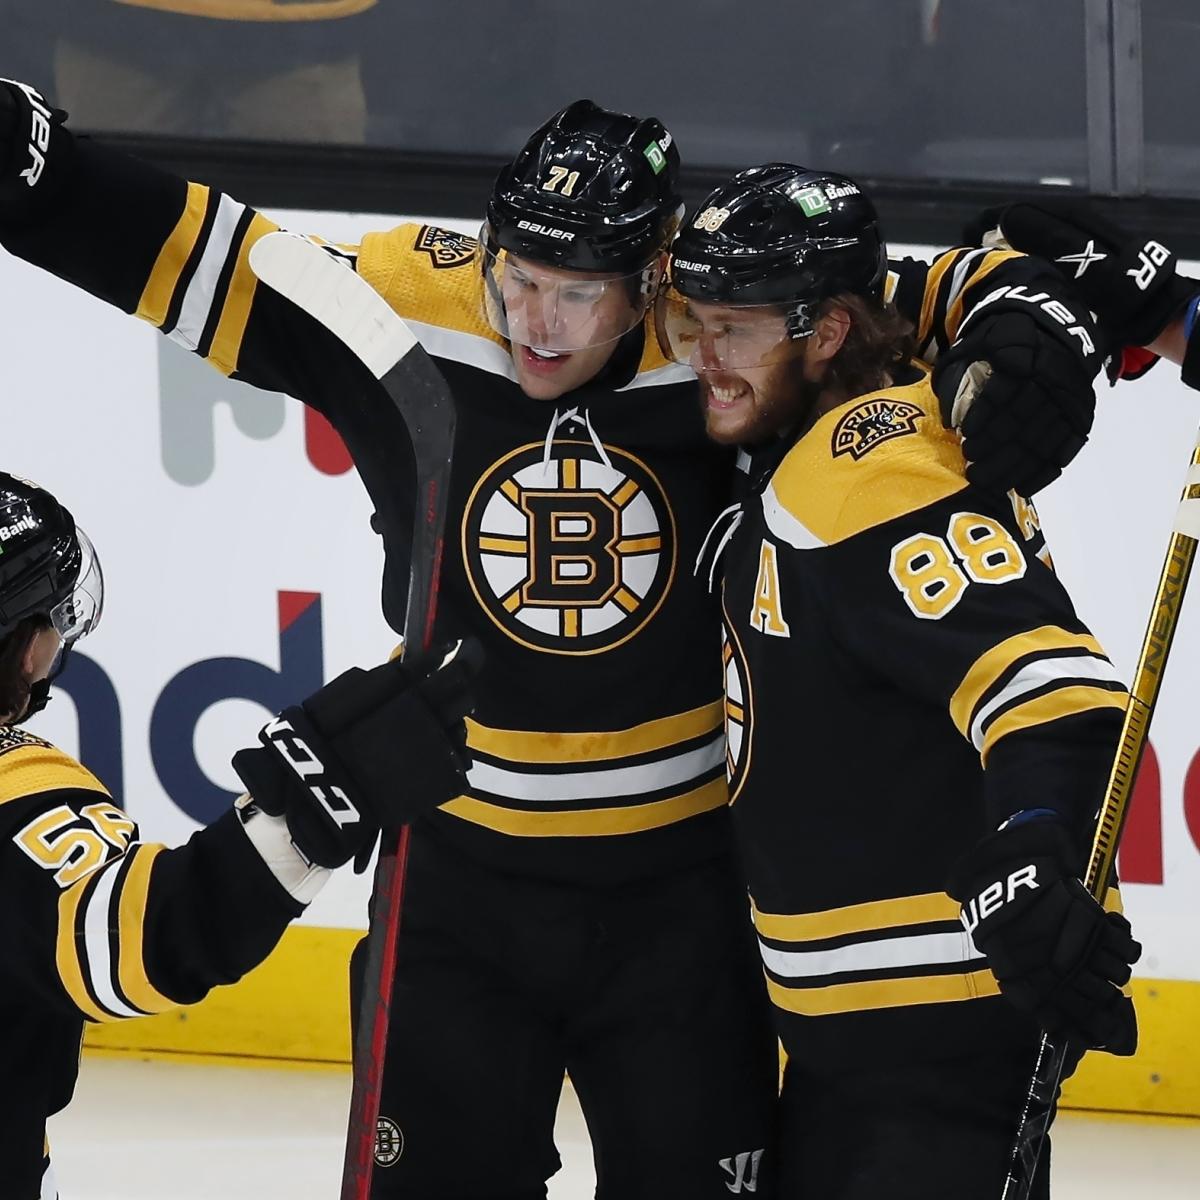 Bruins 2022: Free Agents, Draft Targets and Offseason Guide after NHL Playoff Loss thumbnail